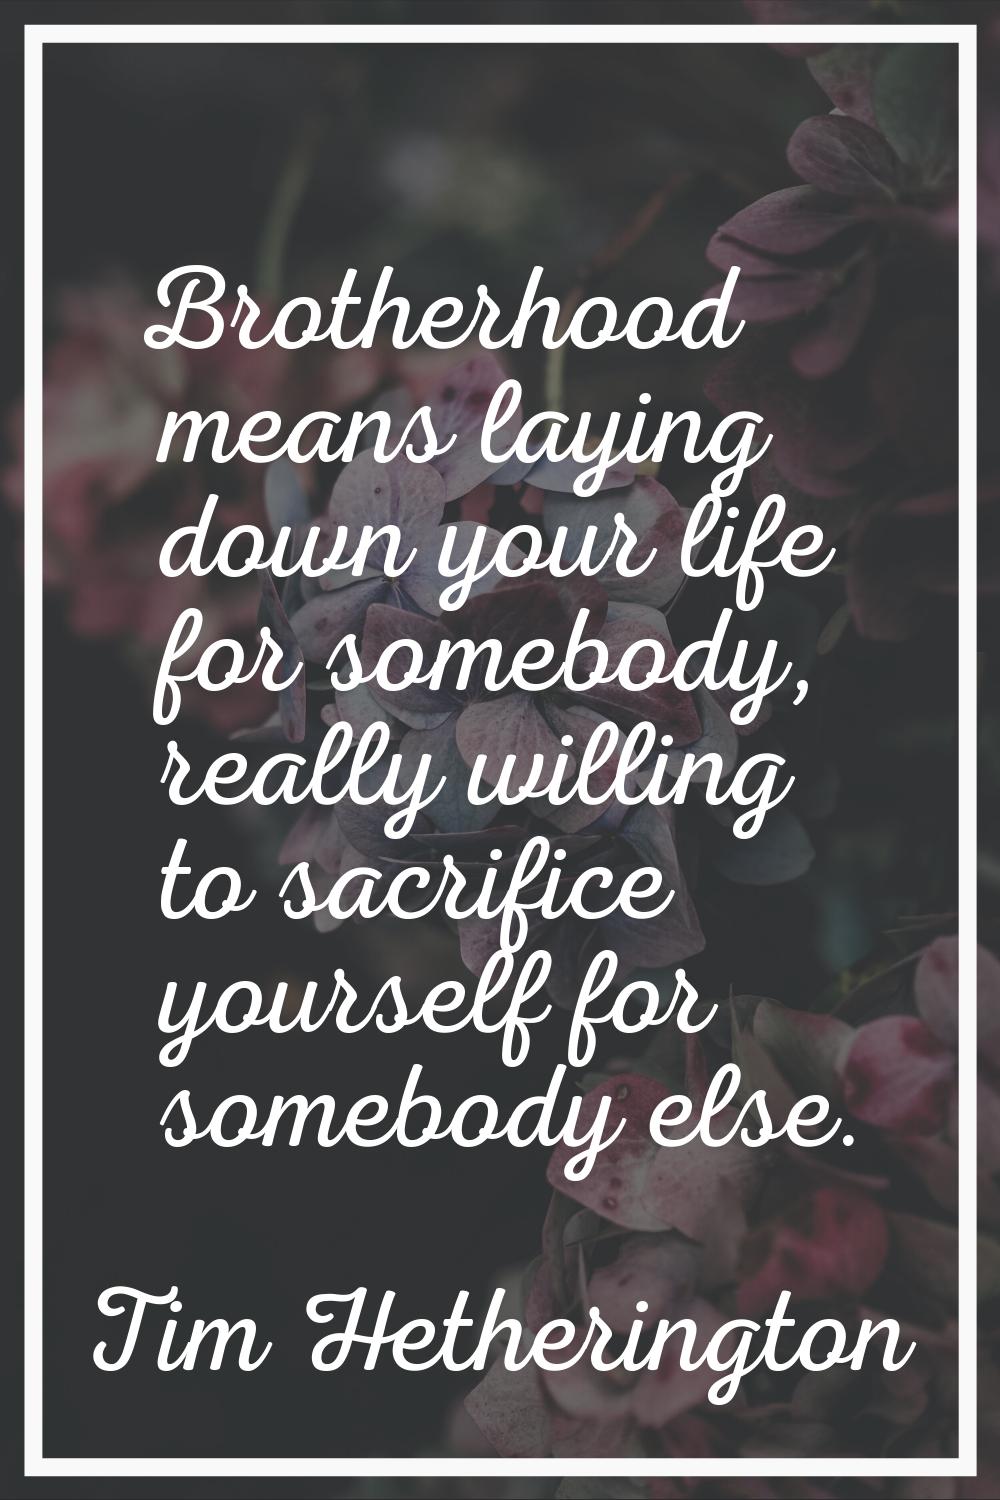 Brotherhood means laying down your life for somebody, really willing to sacrifice yourself for some